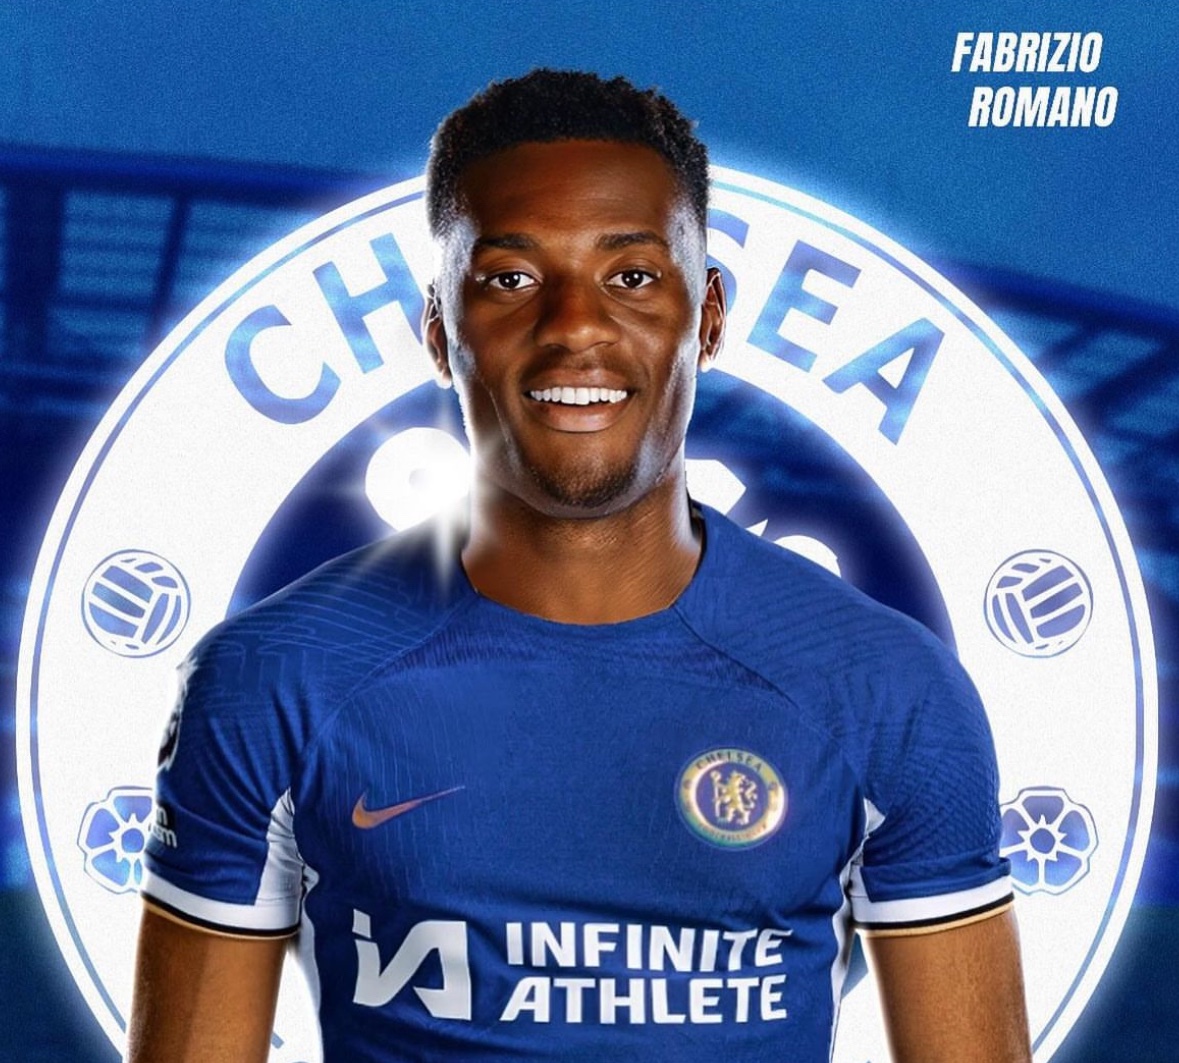 🔵 Chelsea expect Tosin Adarabioyo deal to be signed and sealed next week, after verbal agreement reached.

Tosin believes Chelsea are offering the best project for his future, with Enzo Maresca also being a factor for his decision.